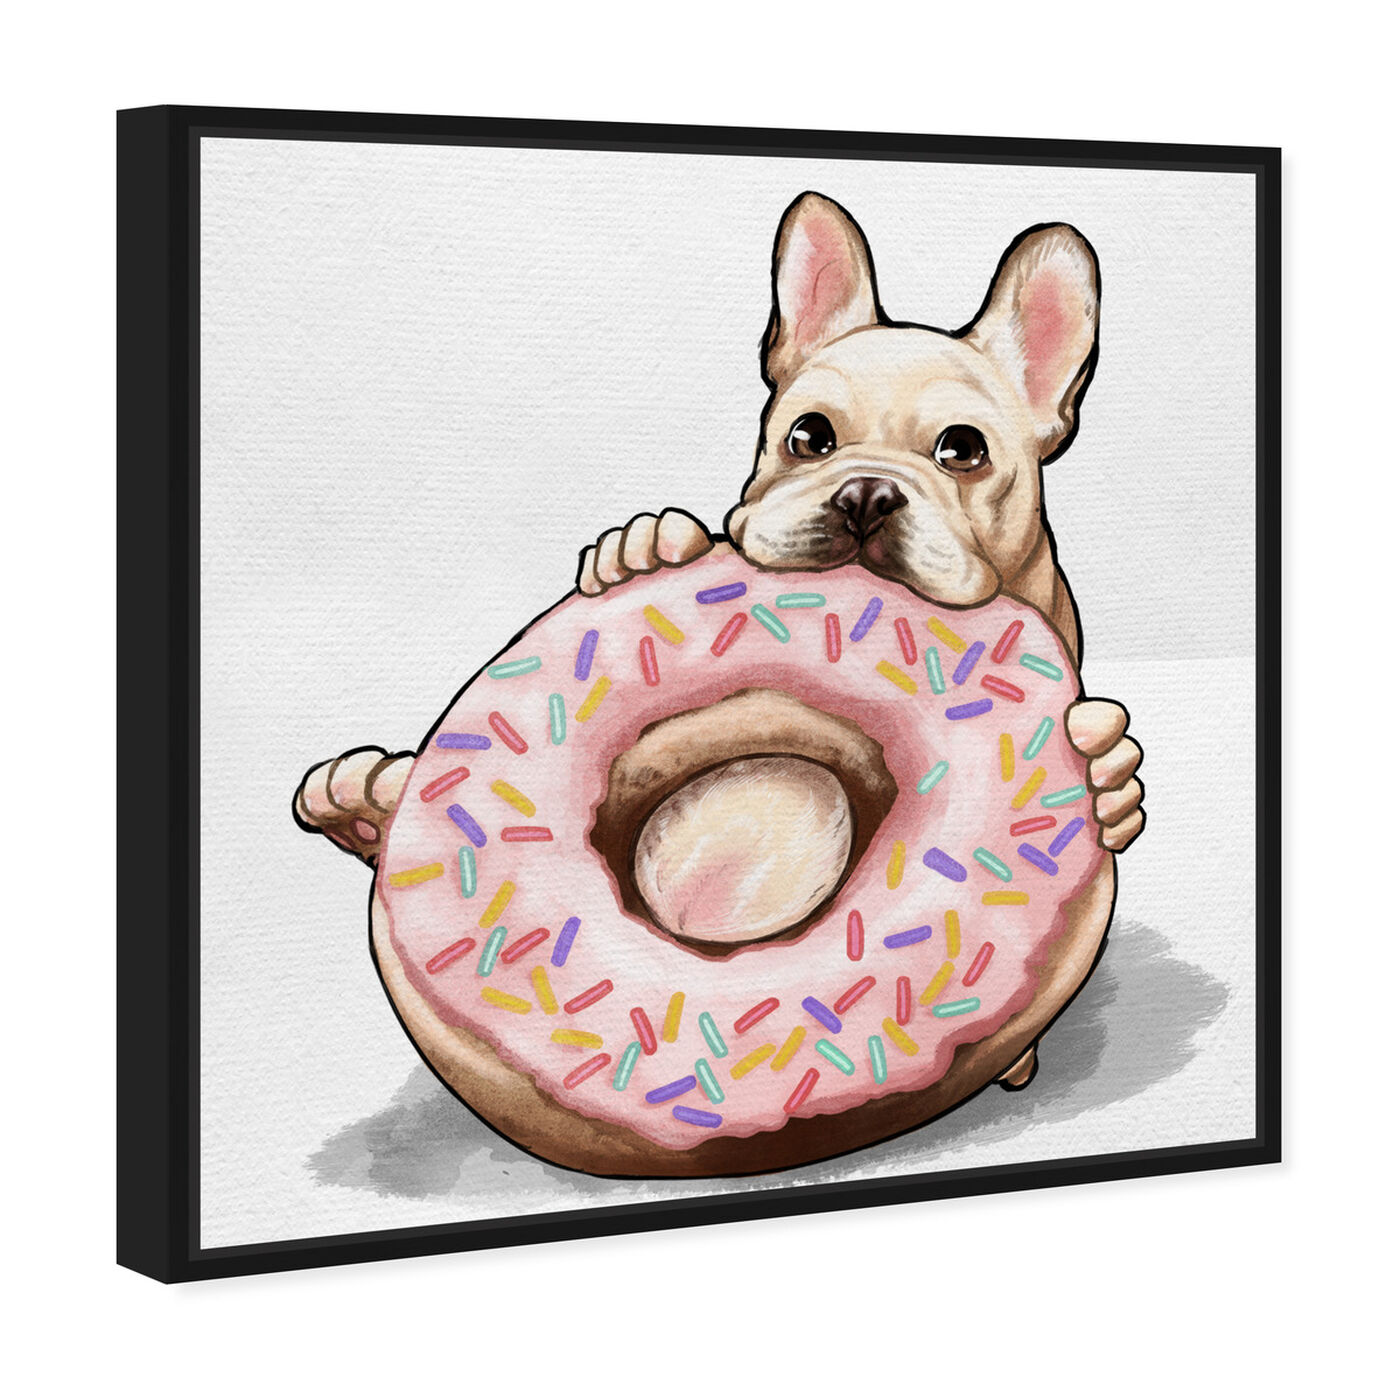 Angled view of Donut Frenchie featuring animals and dogs and puppies art.